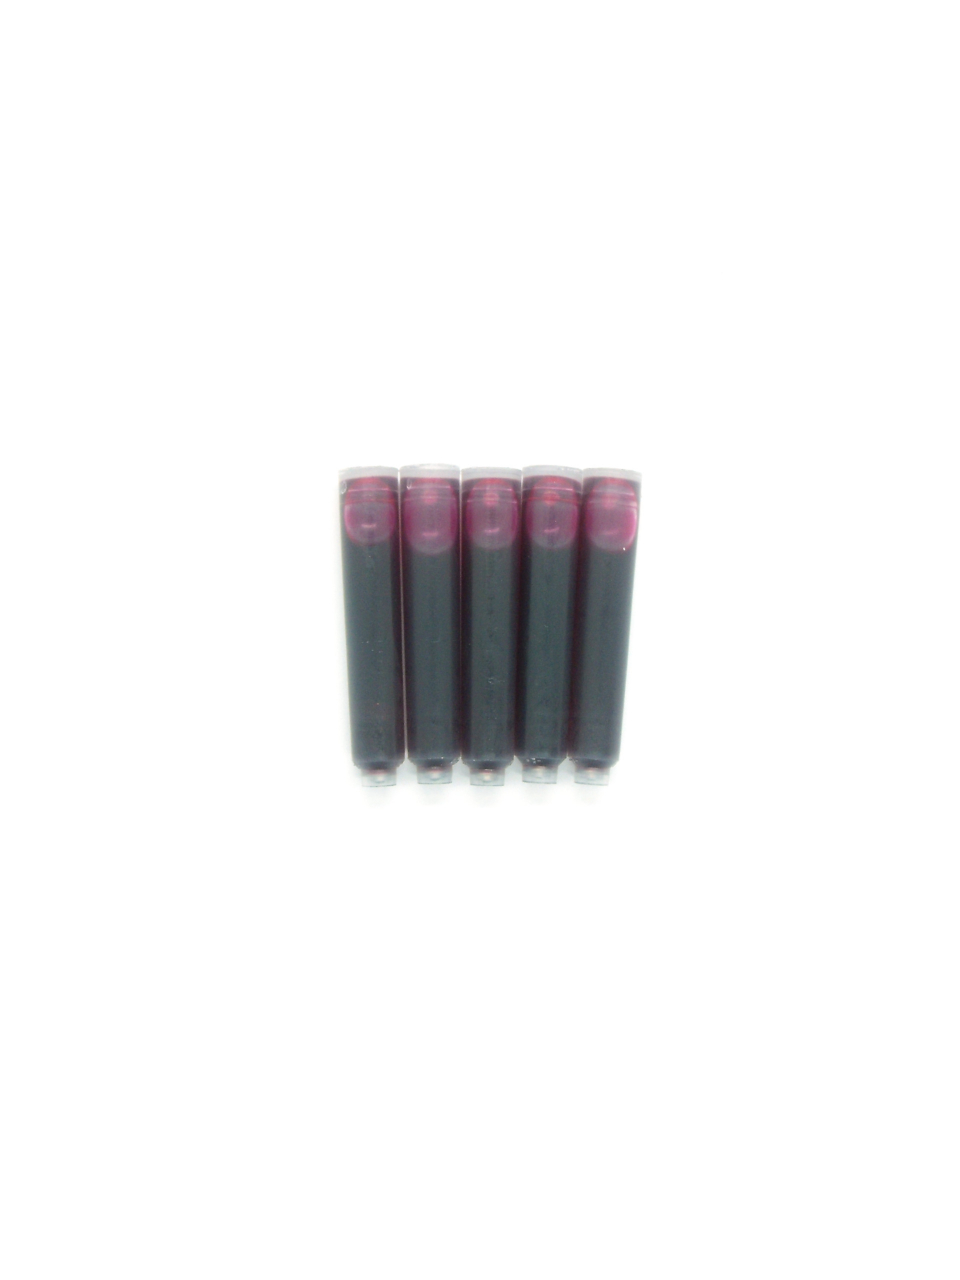 PenConverter Ink Cartridges For Otto Hutt Fountain Pens (Pink)